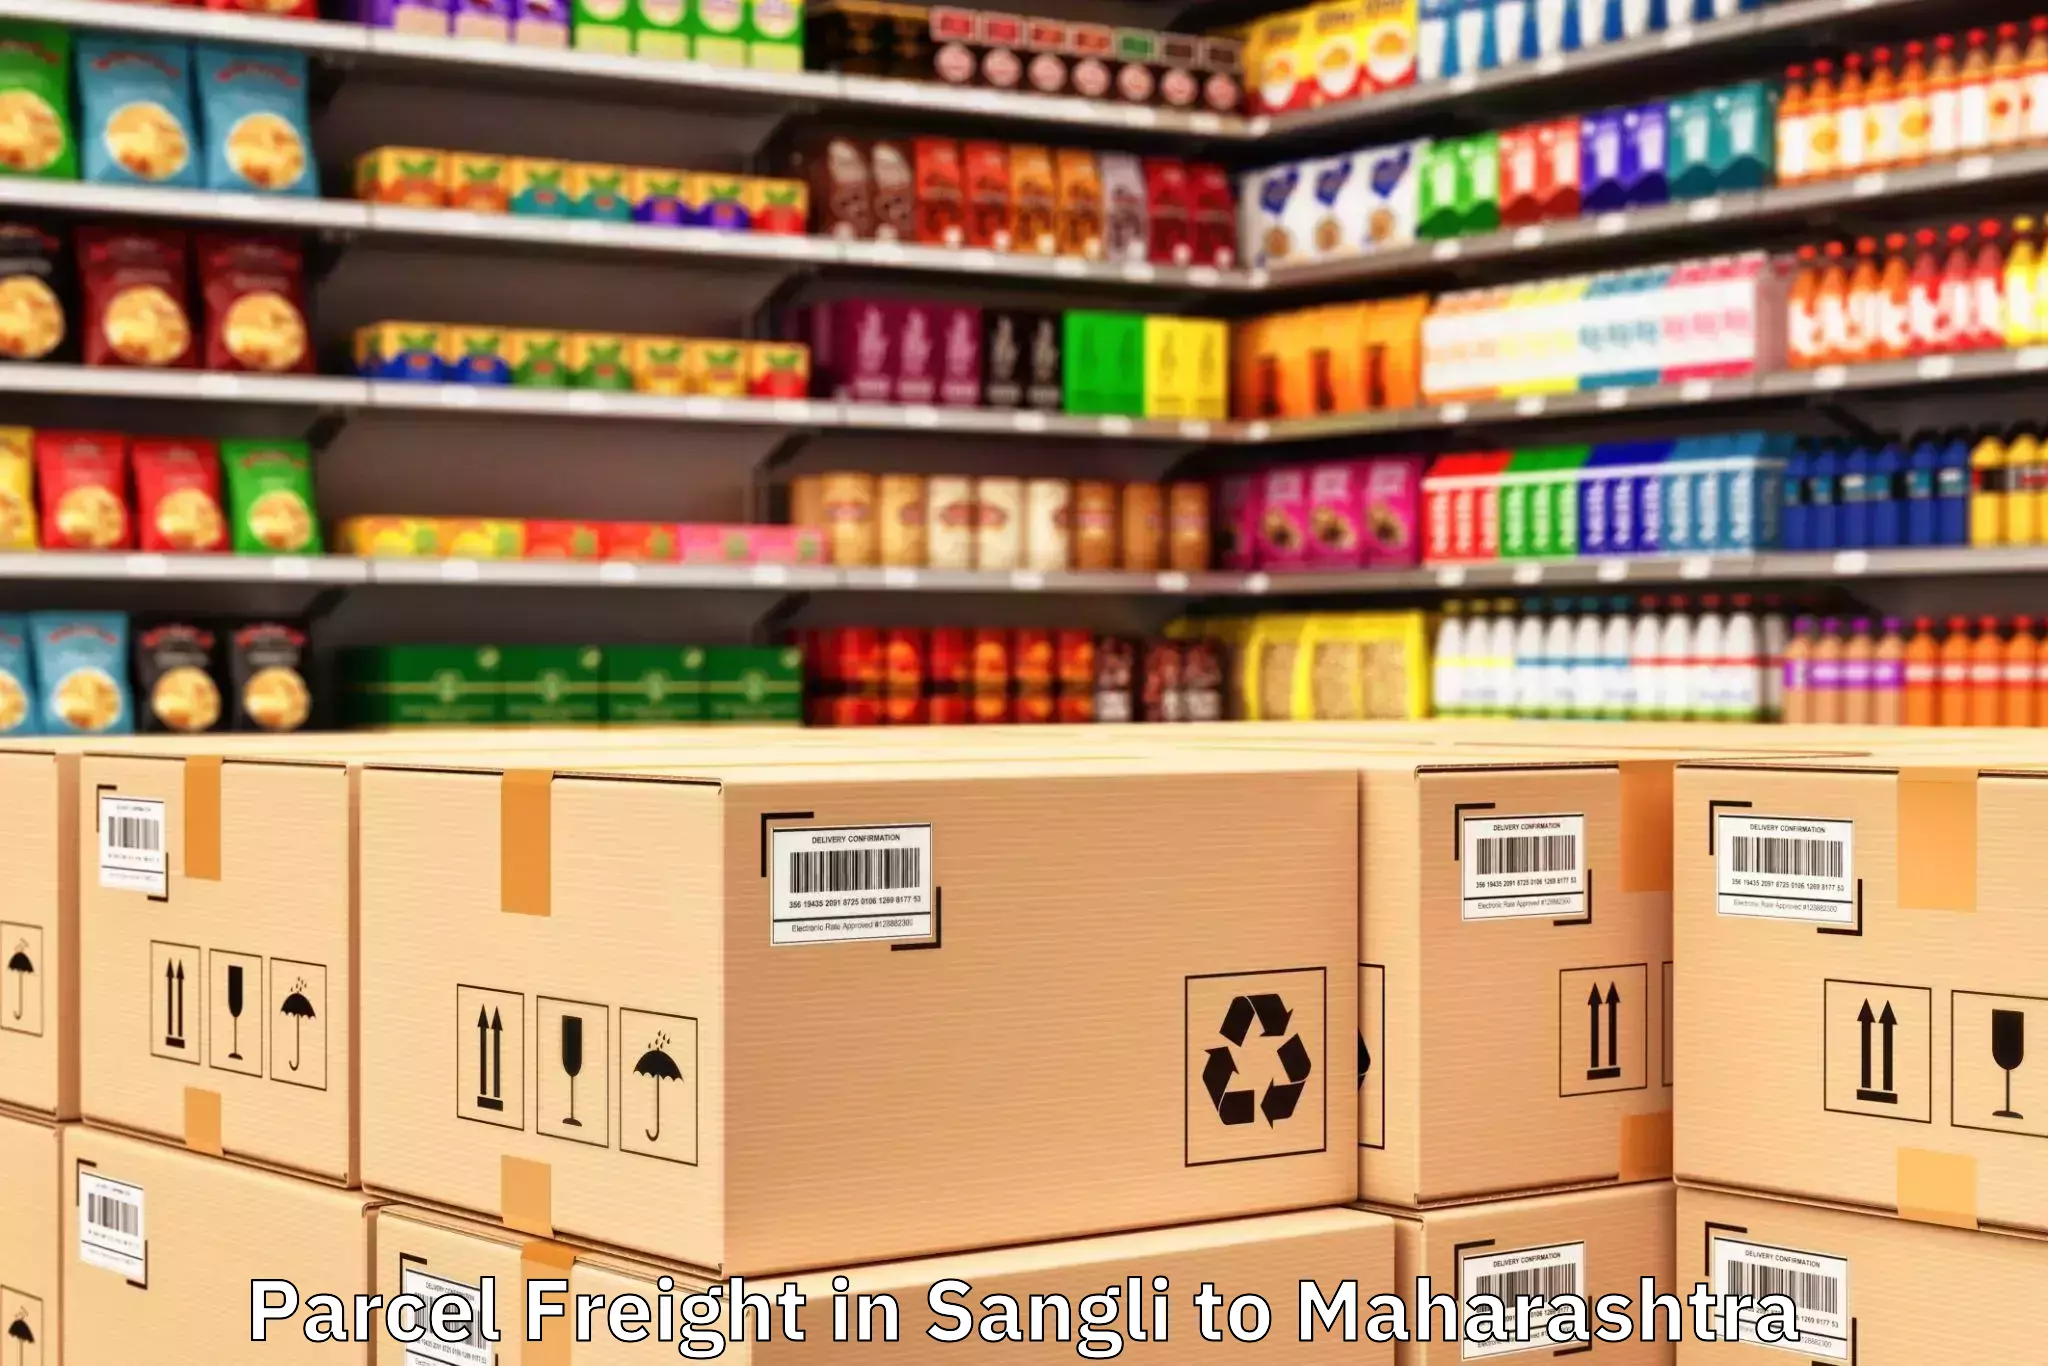 Top Sangli to Elpro City Square Mall Parcel Freight Available